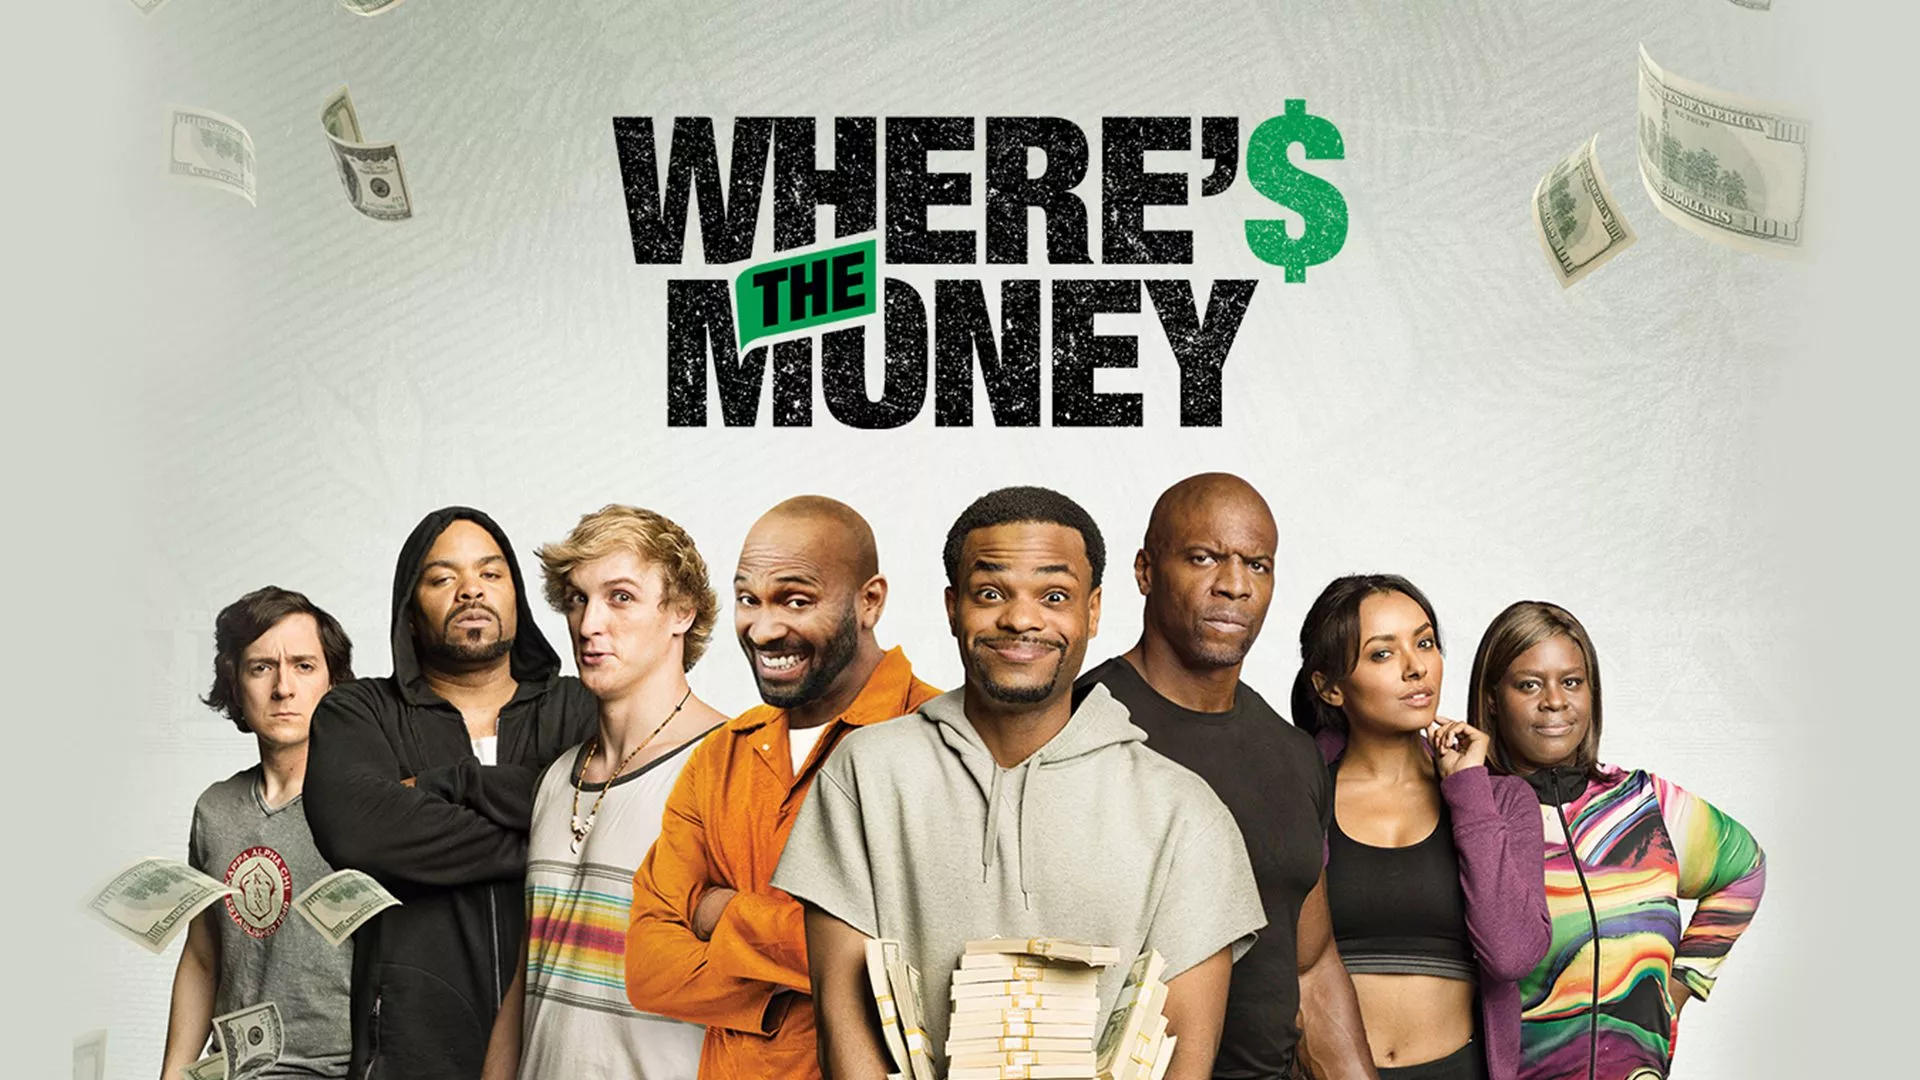 WHERE'S THE MONEY Official Trailer #1 (2017) Terry Crews, Logan Paul Comedy Movie HD